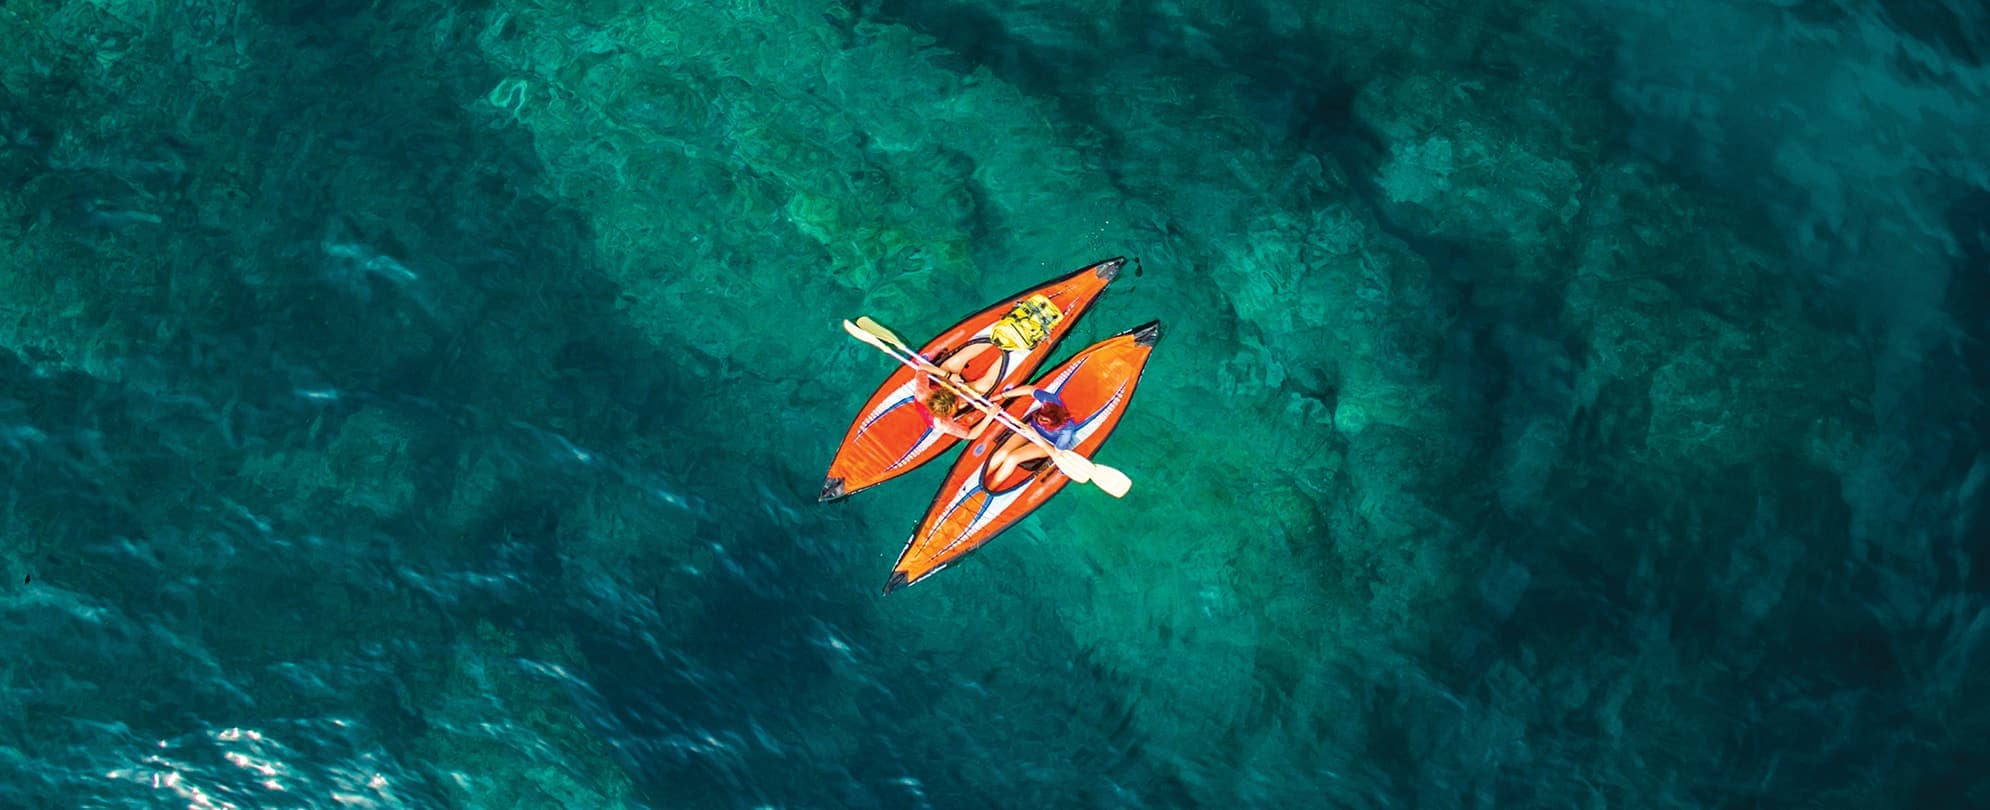 Two kayakers floating together in the middle of a body of water 